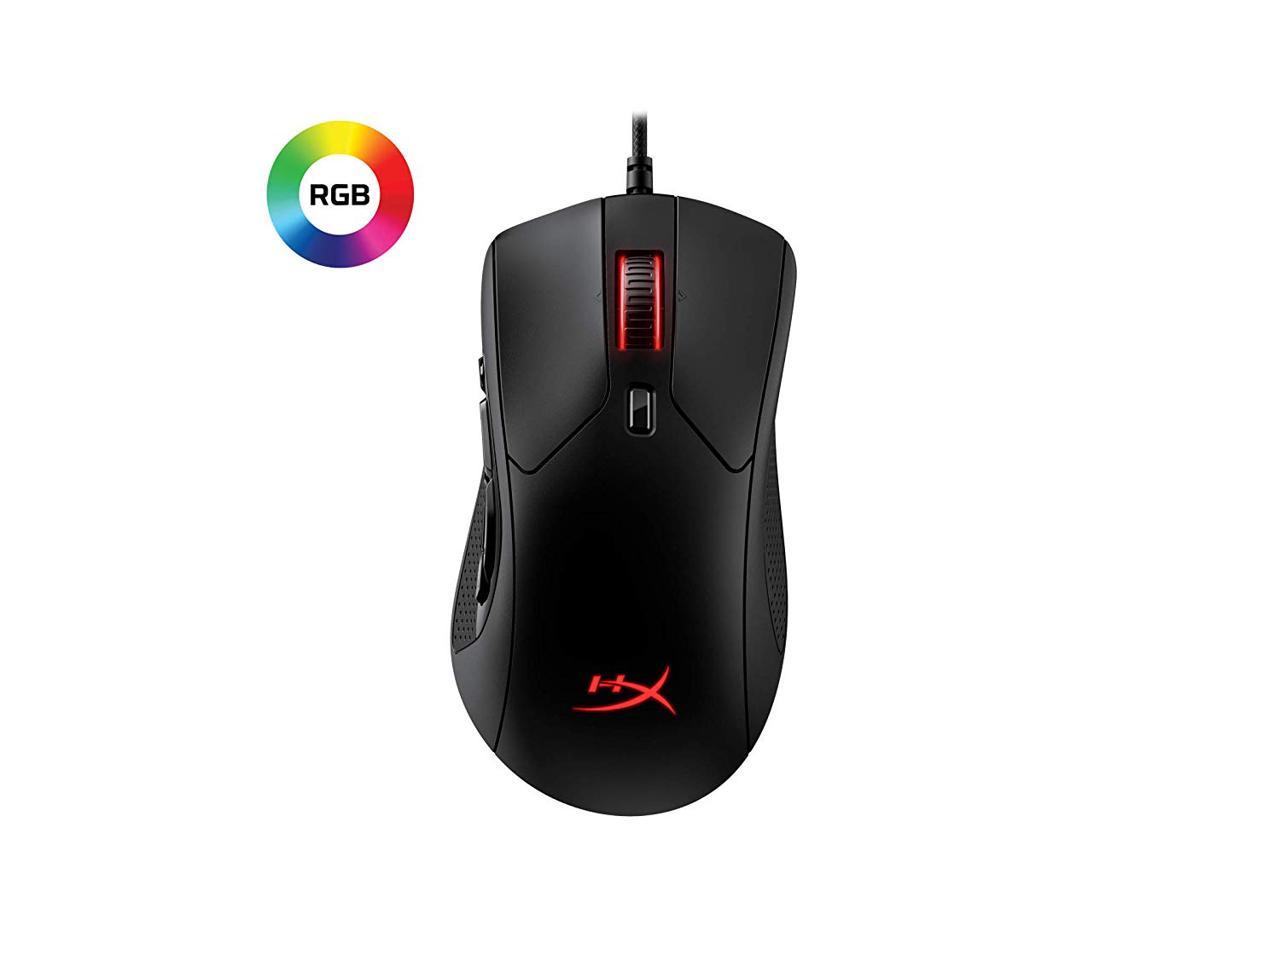 thee Madison scherm HyperX Pulsefire Raid – Gaming Mouse – 11 Programmable Buttons, RGB,  Ergonomic Design, Comfortable Side Grips, Software-Controlled Customization  - Newegg.com